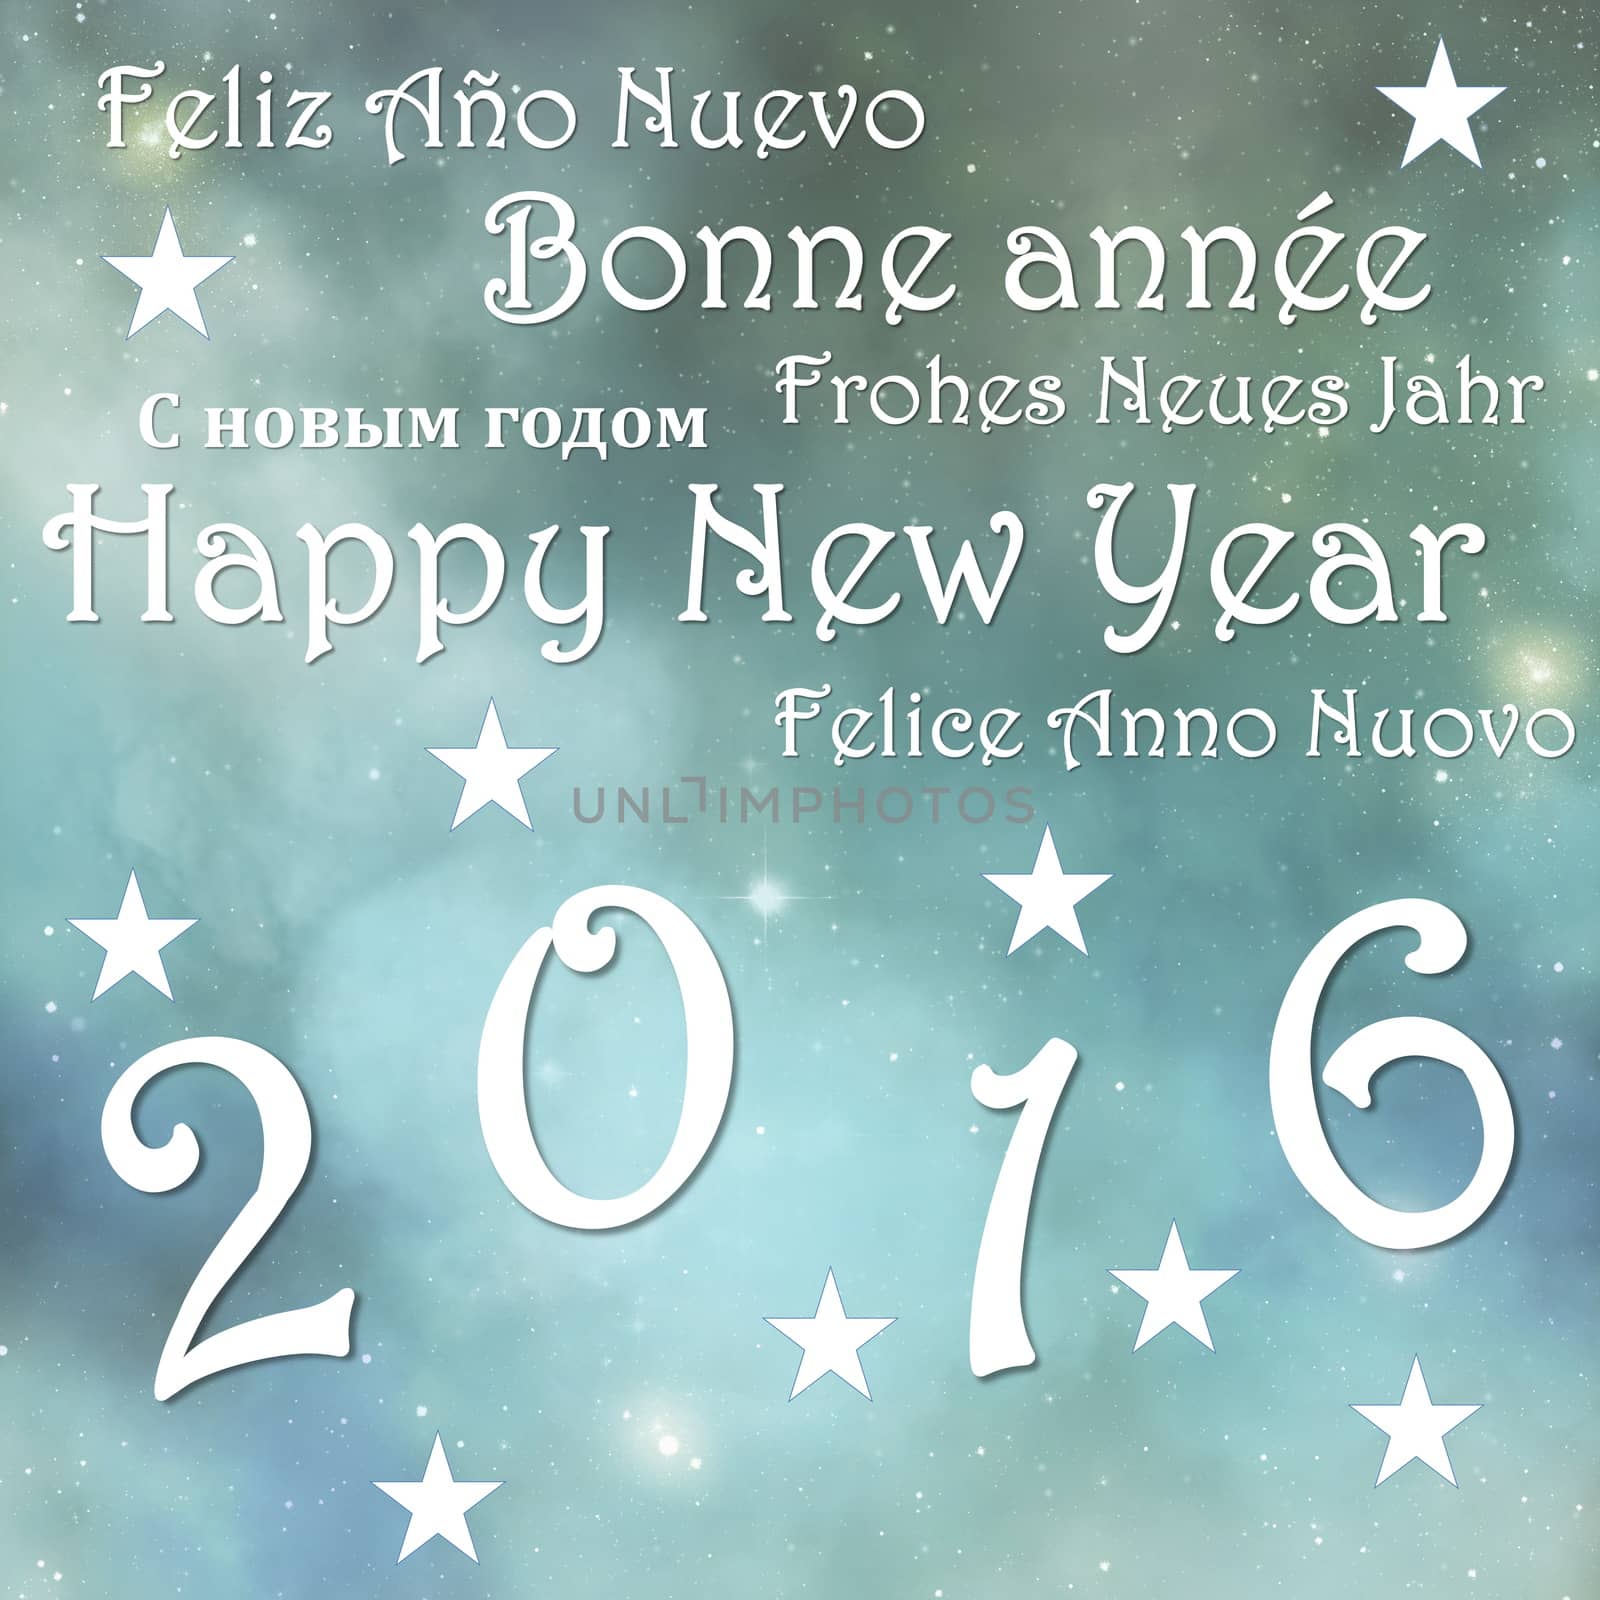 Happy new year 2016, in blue sky background with stars - 3D render